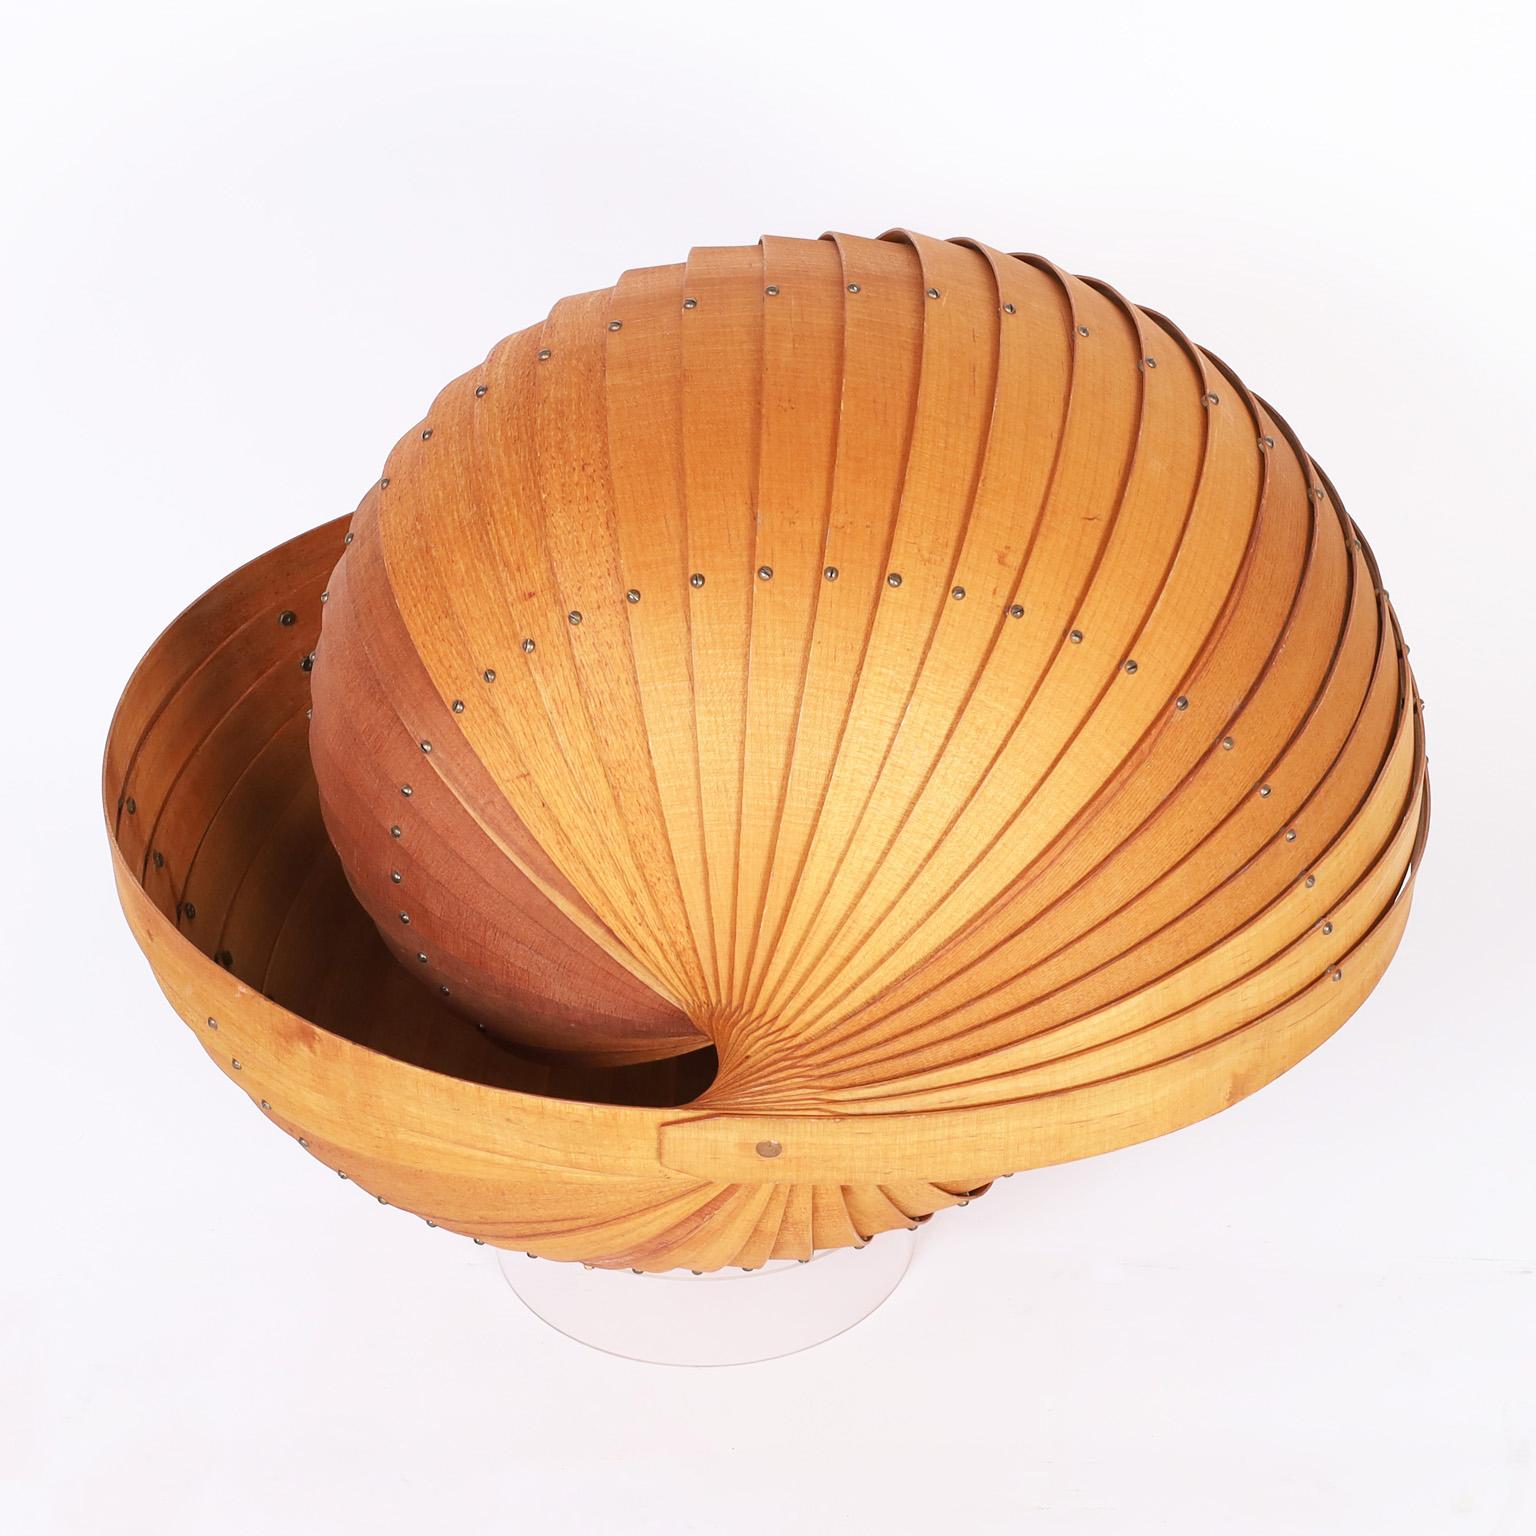 Mid century sculpture crafted in oak and ash woods with striking precision creating a mind blowing double sided nautilus seashell. Presented on a lucite base.